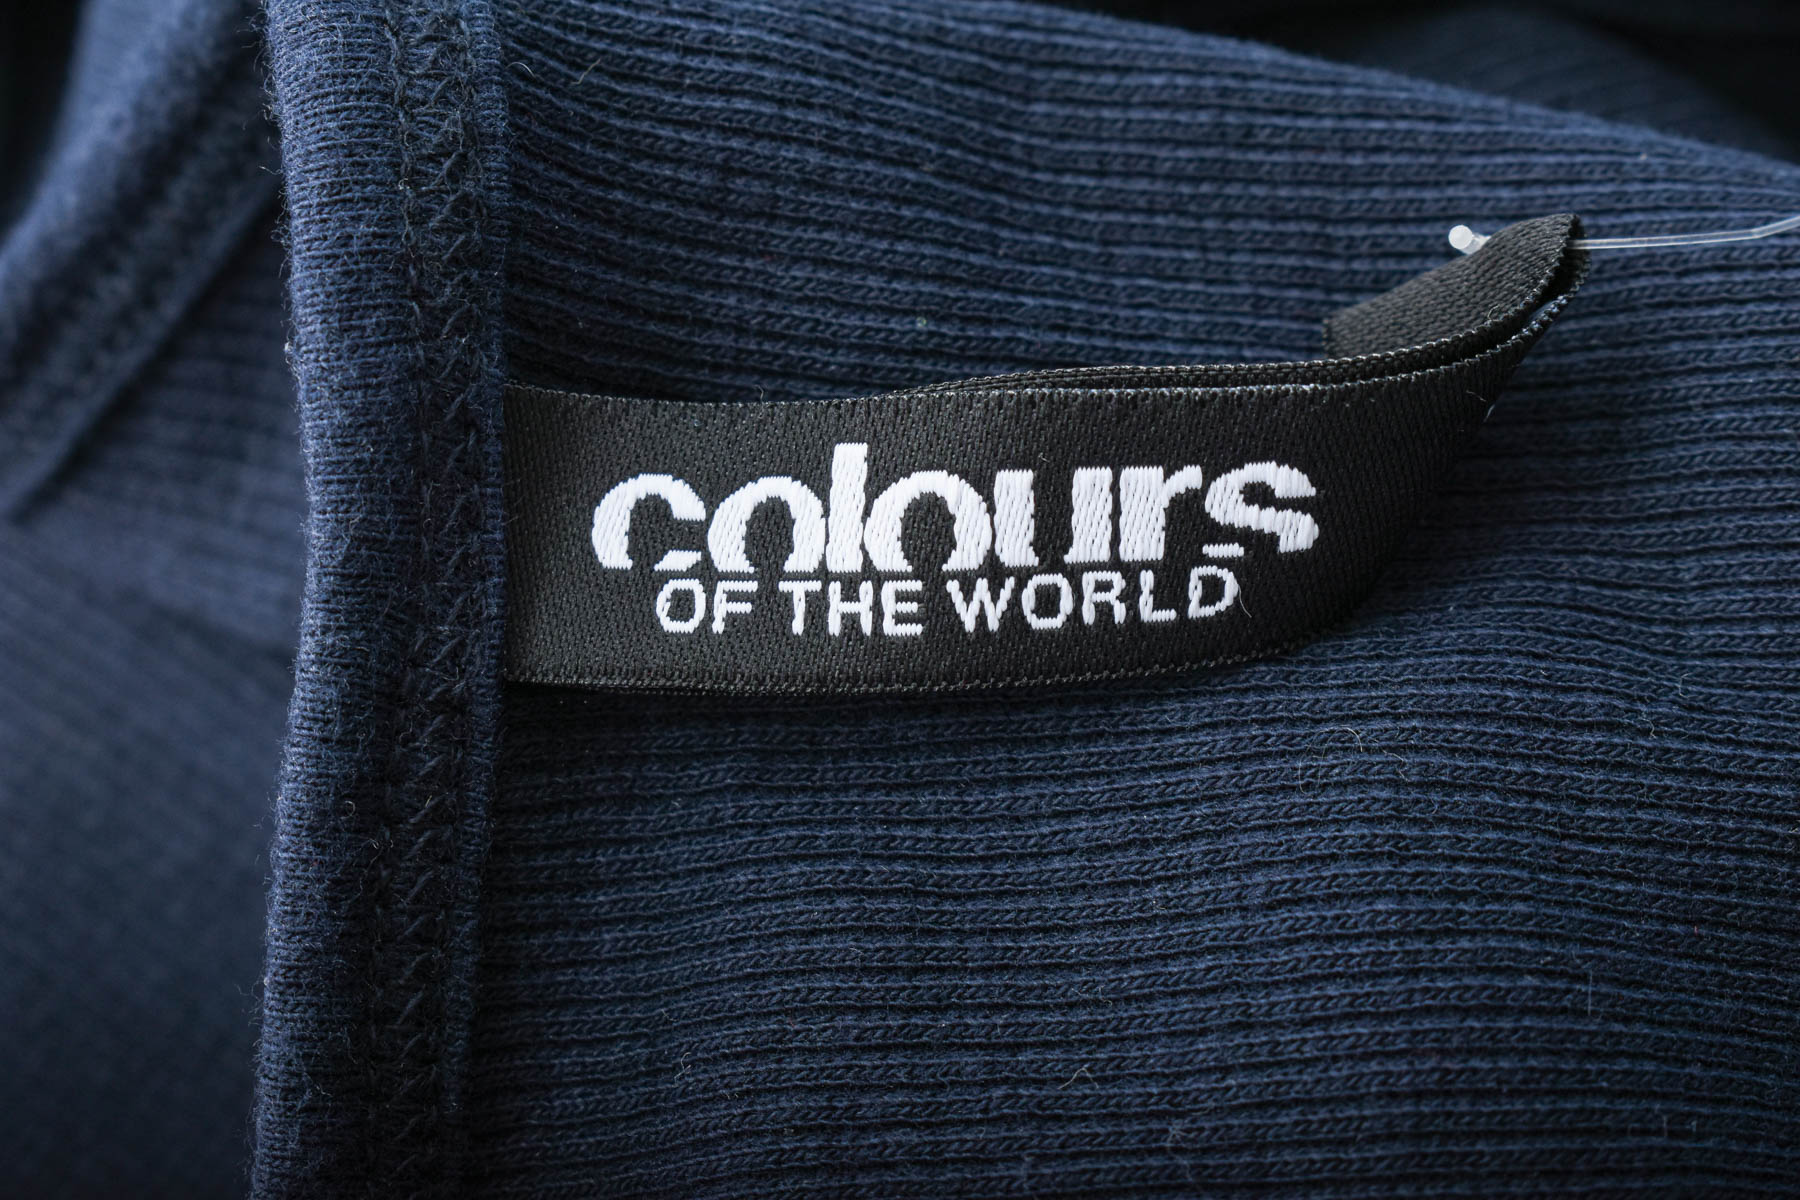 Women's top - Colours of the world - 2